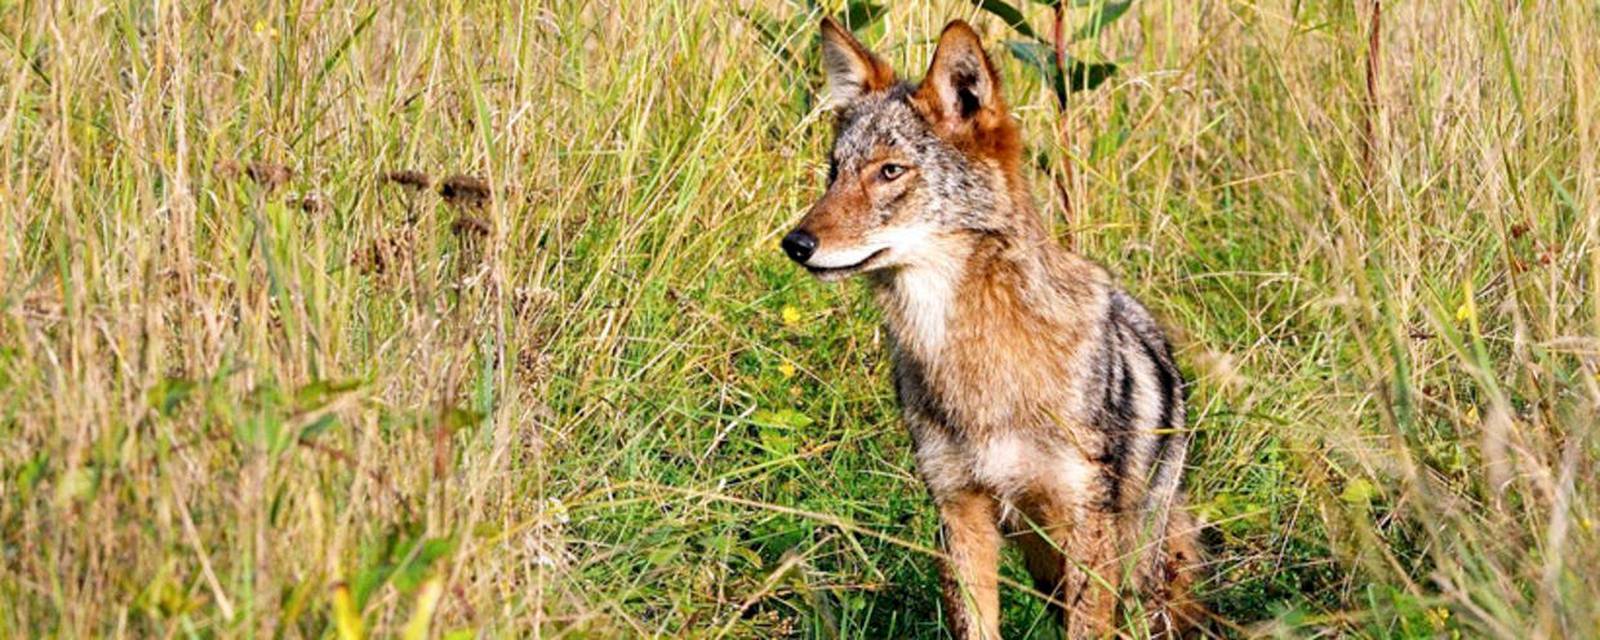 Officials Warn Cape Cod Residents Of Coyote Sightings Boston 25 News